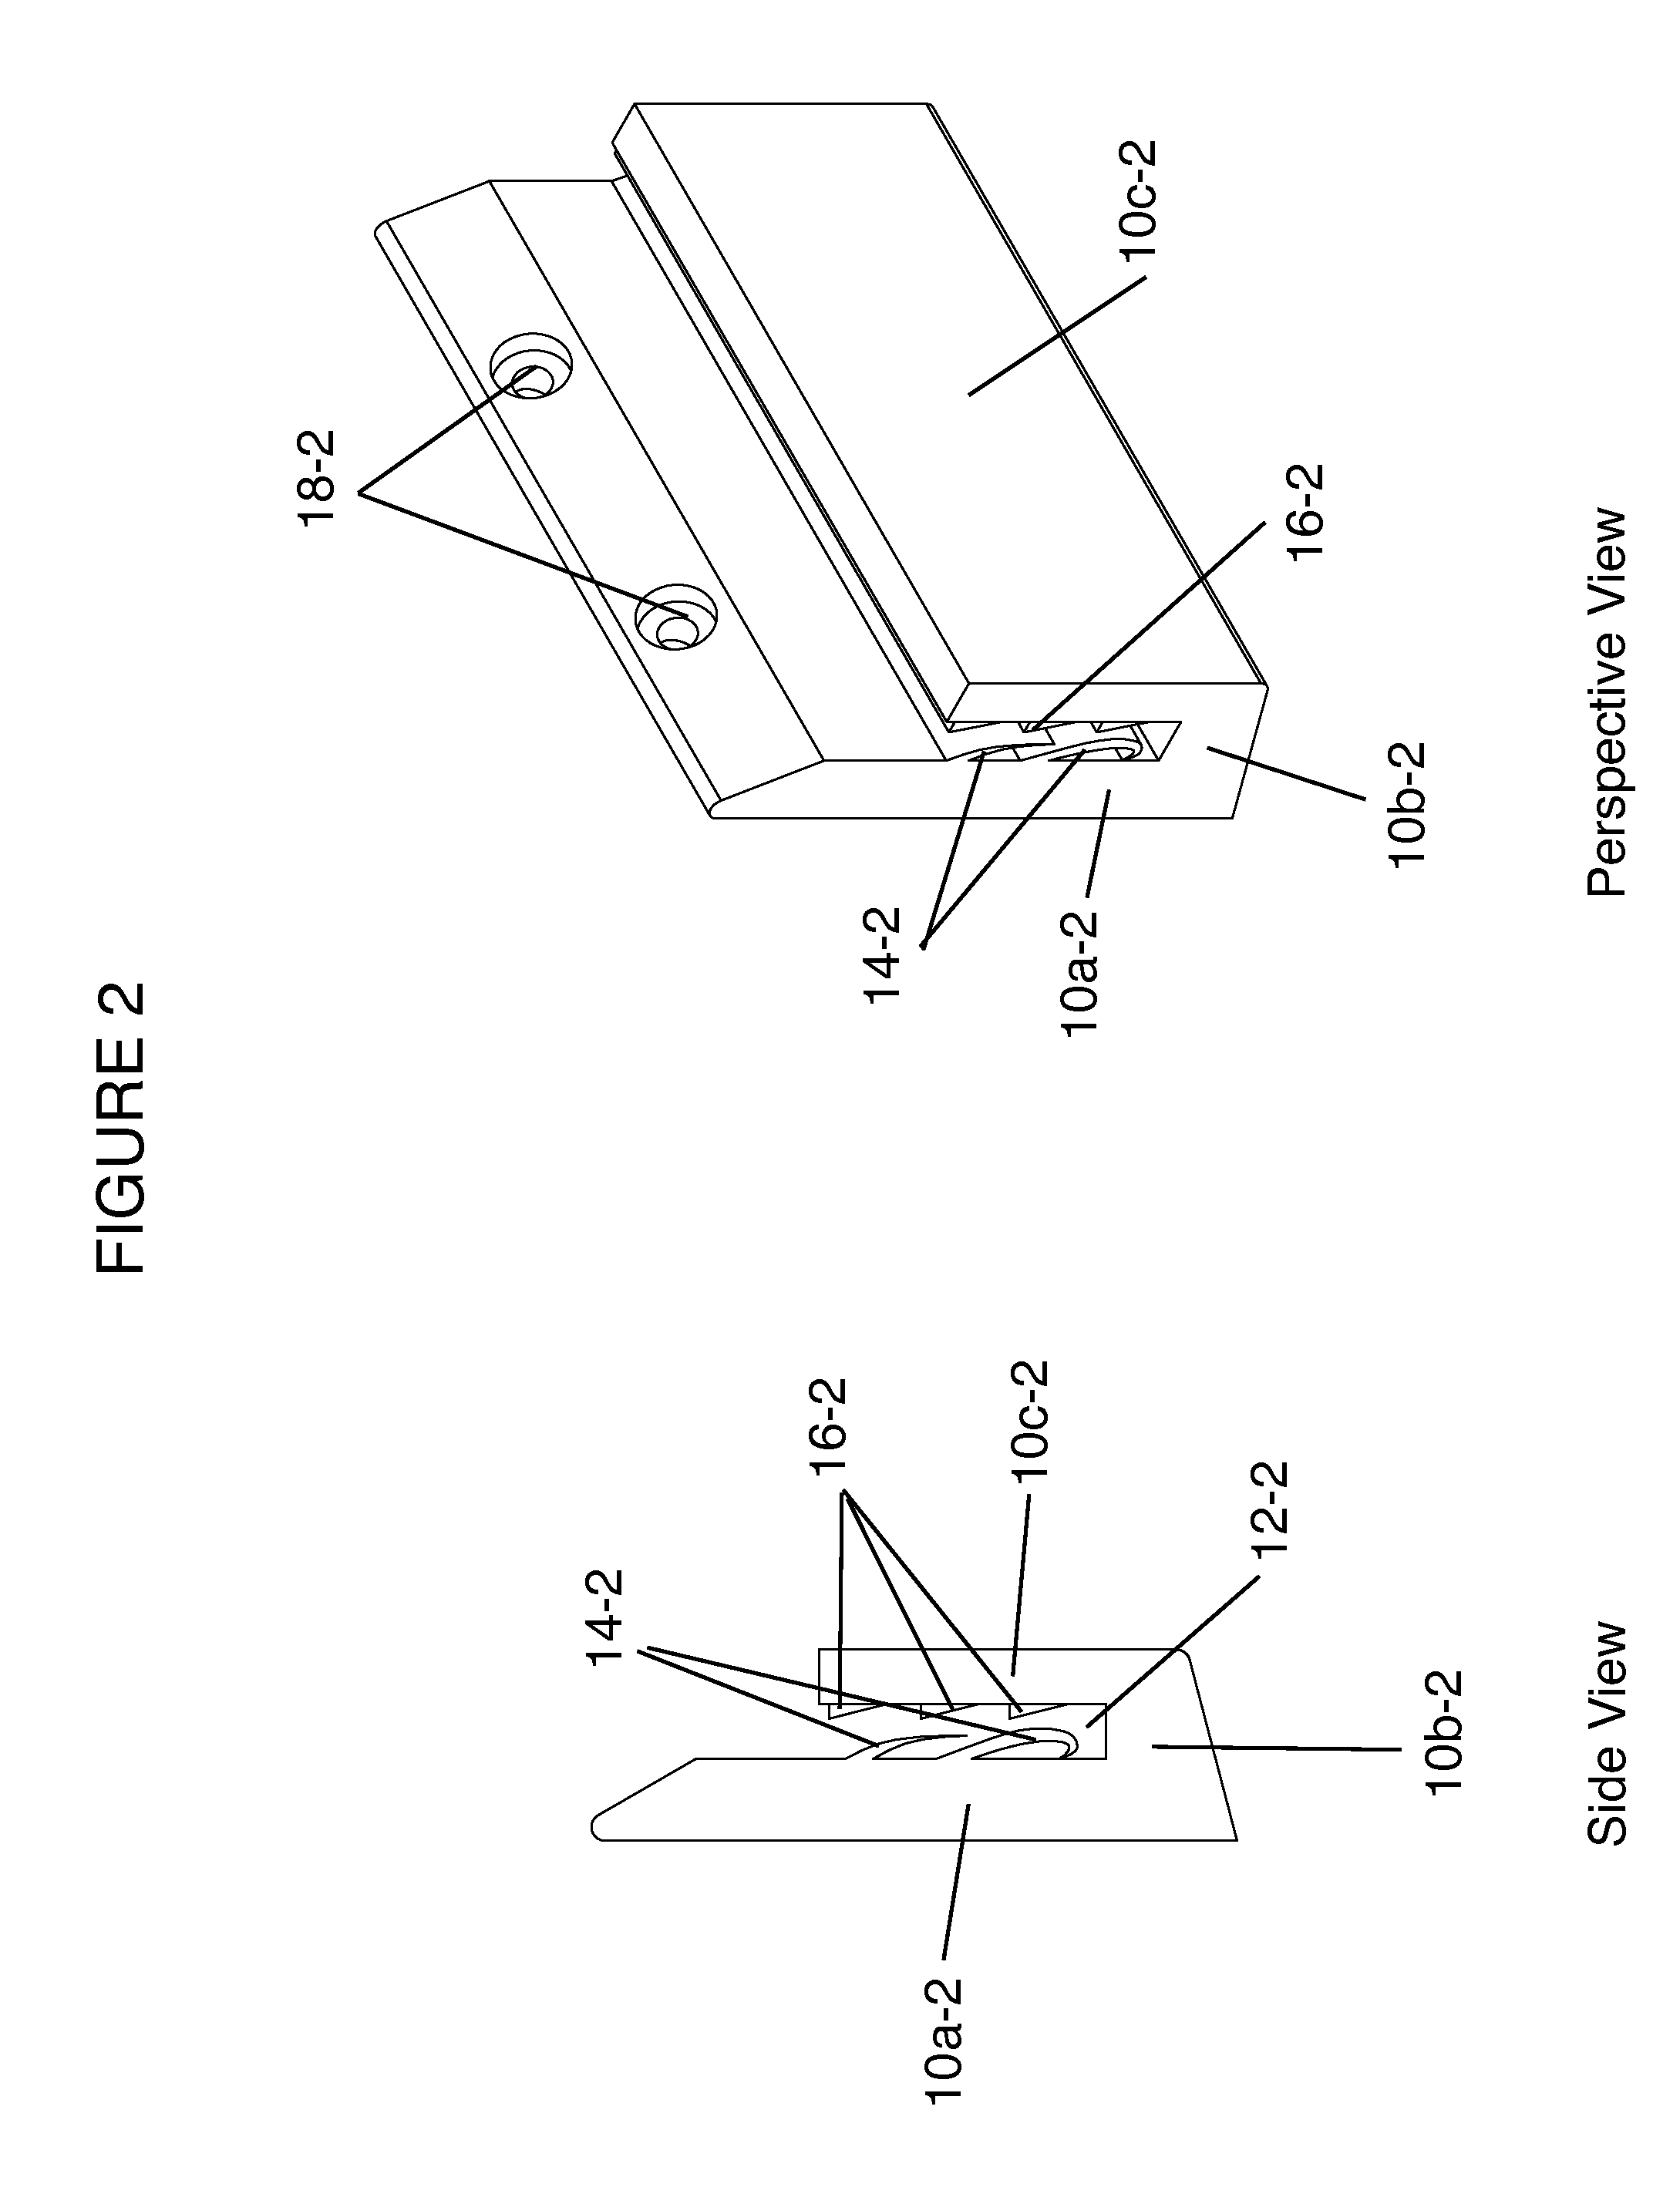 Object hanger hook with friction-increasing compression